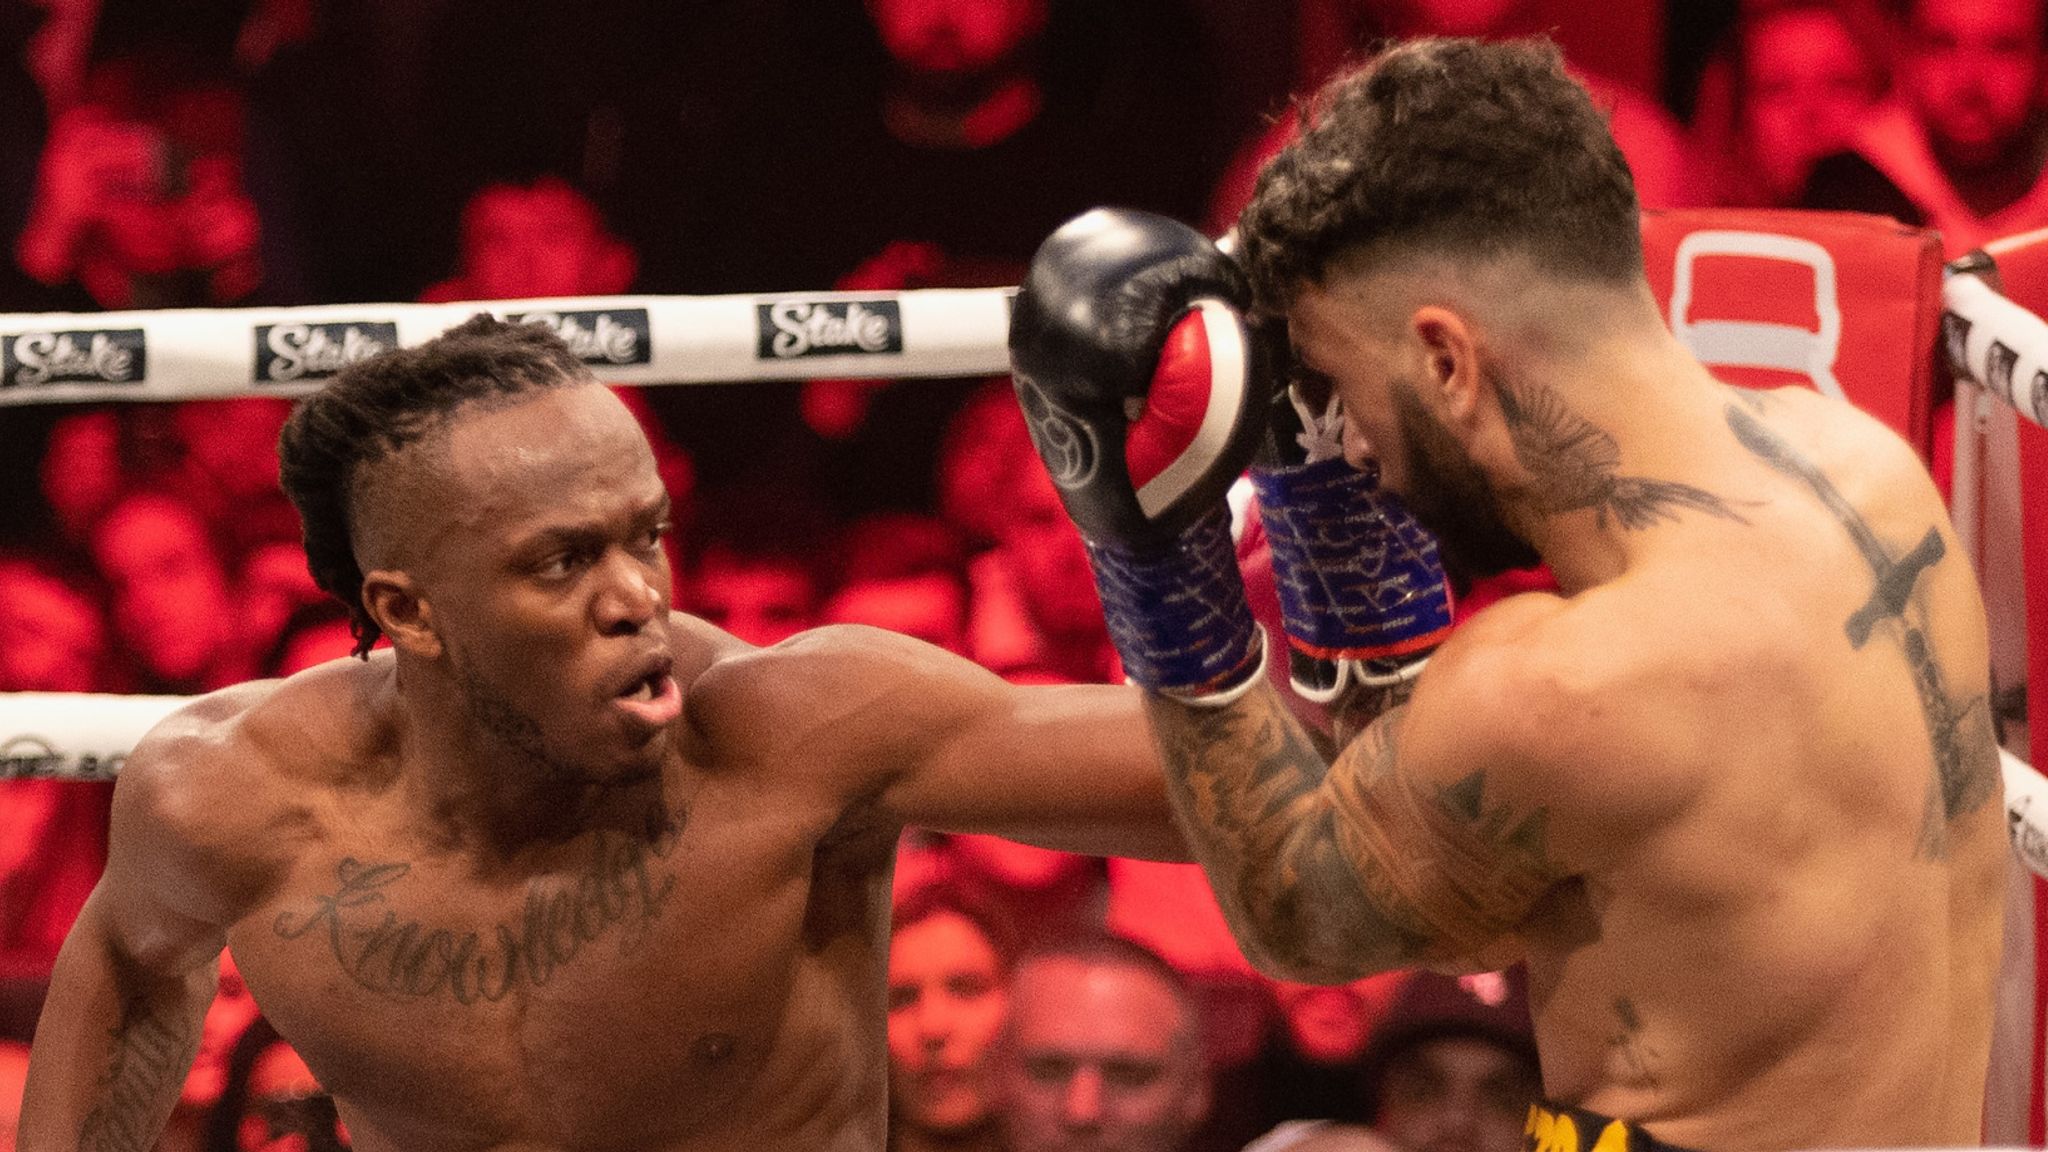 KSI calls out Jake Paul for future fight after knockout win over FaZe